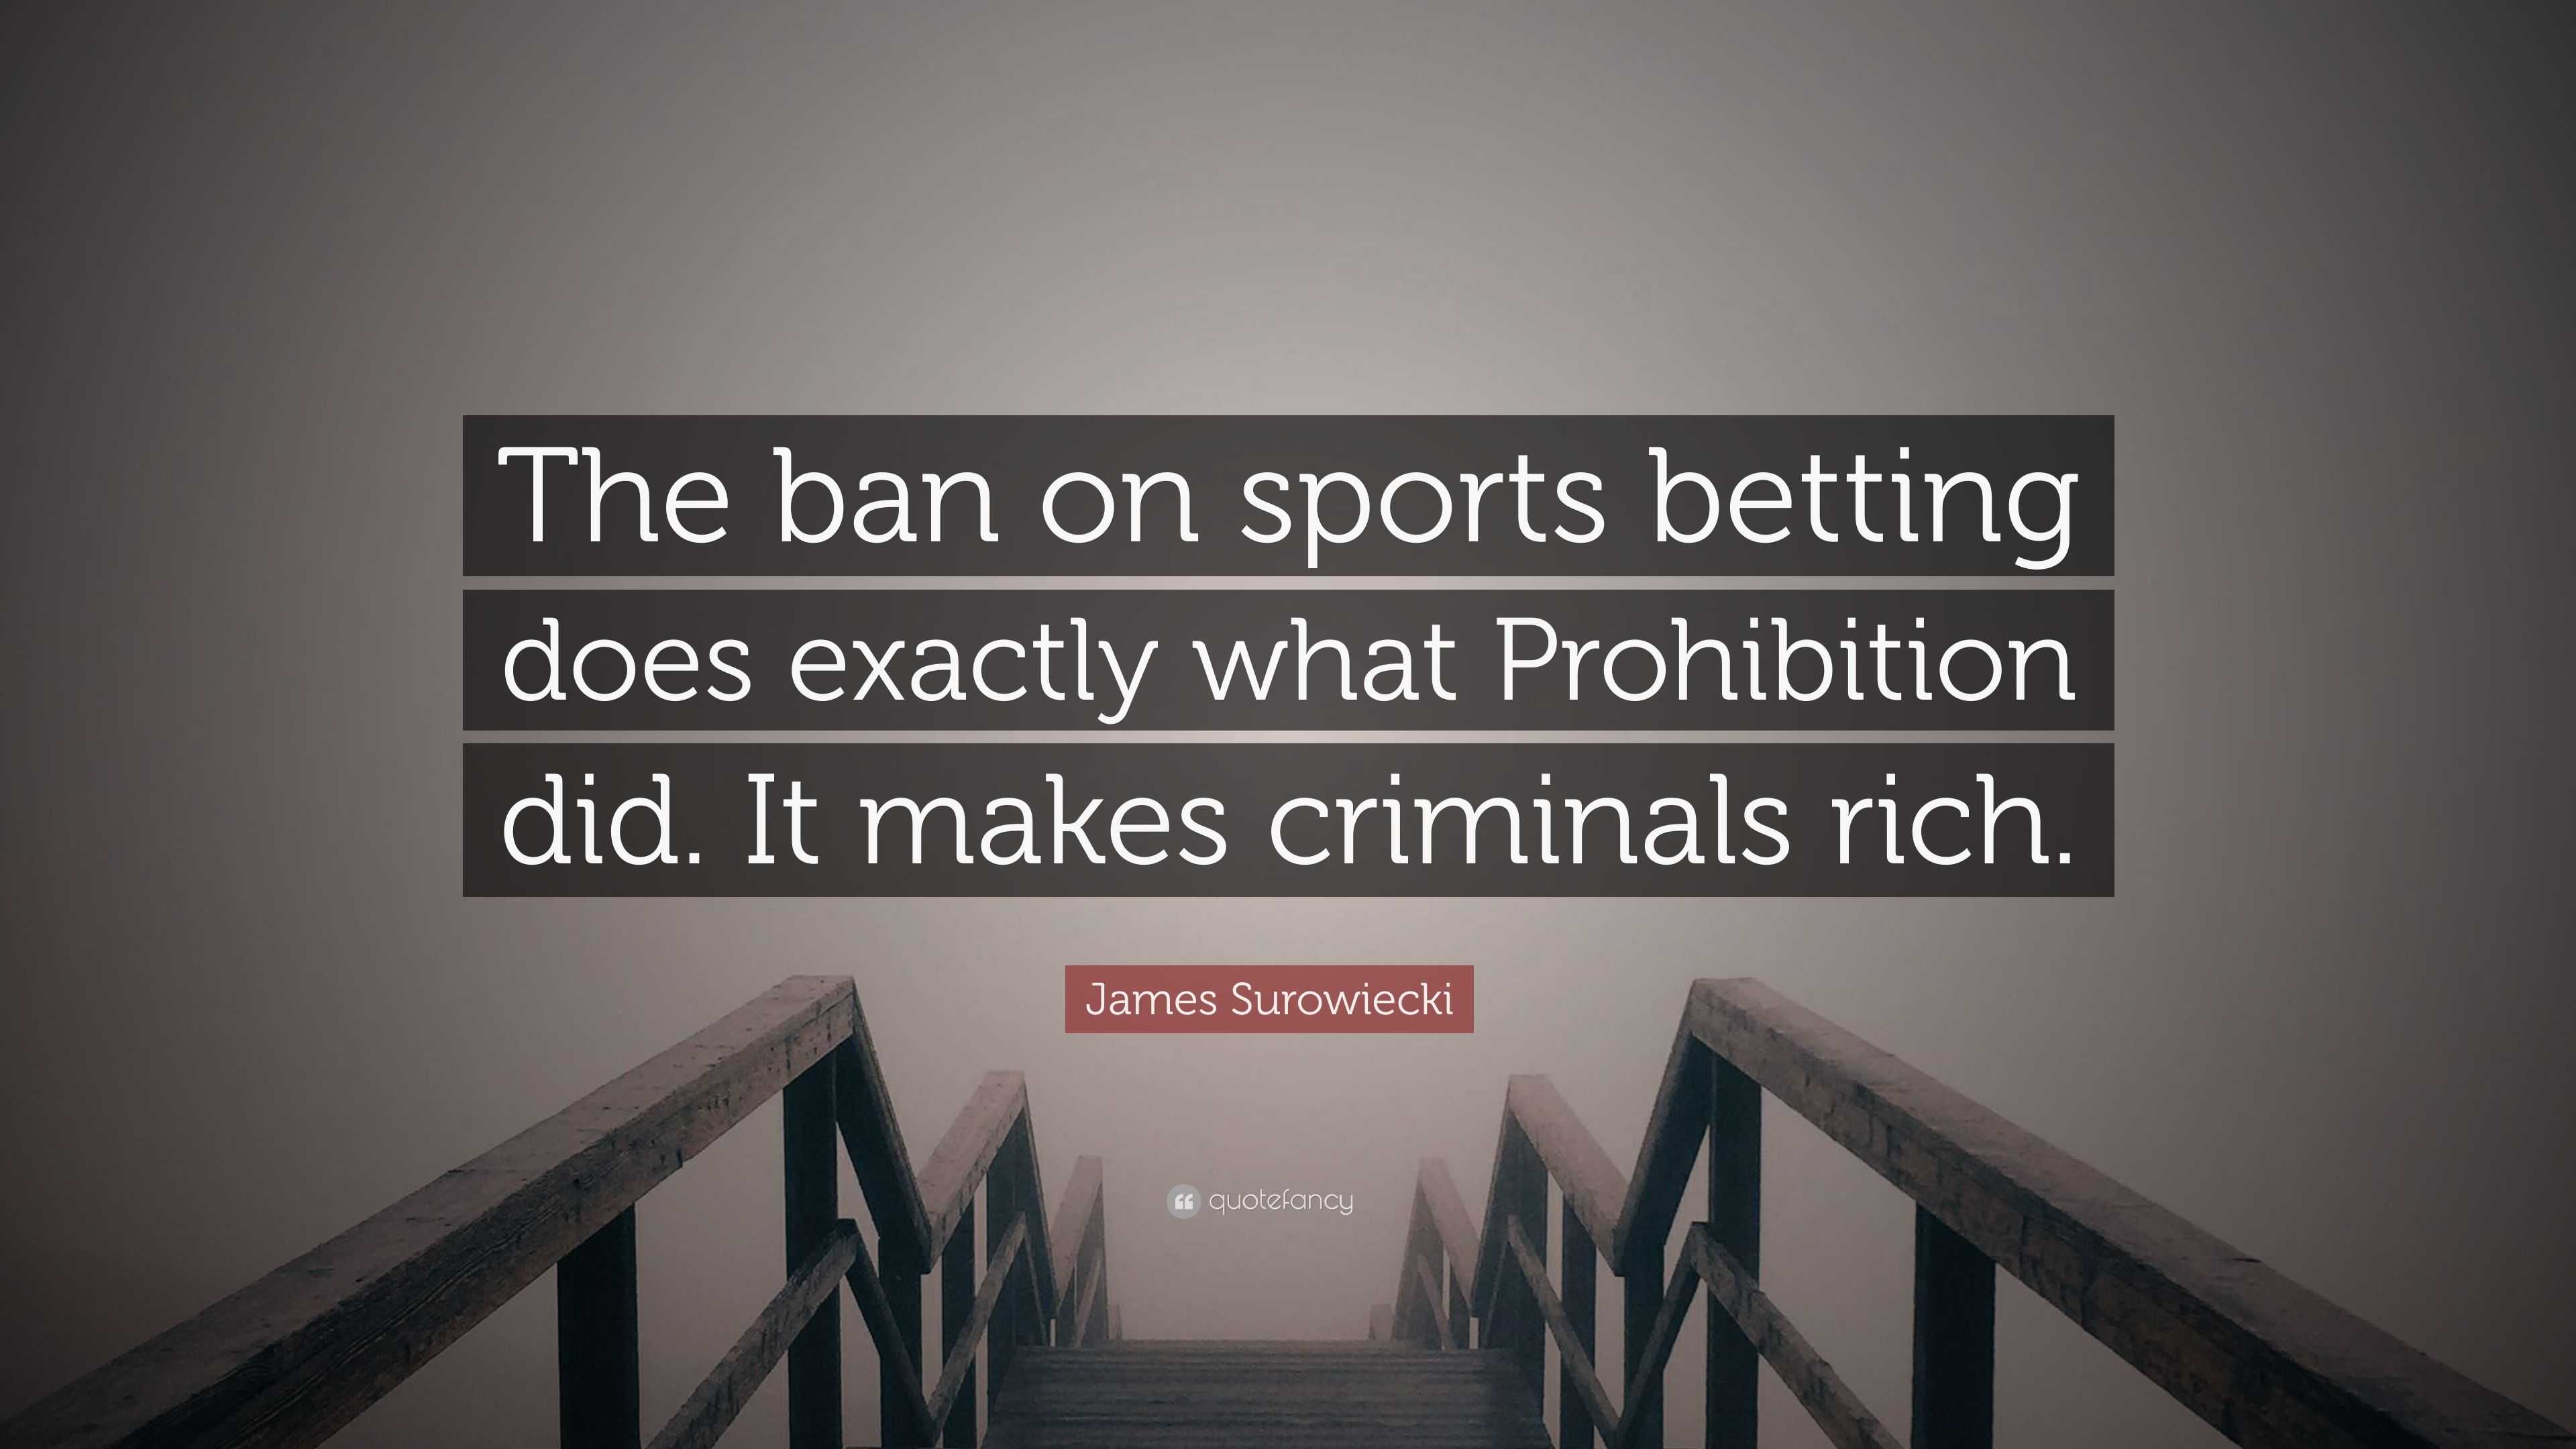 Photo: what does sports betting do for criminals